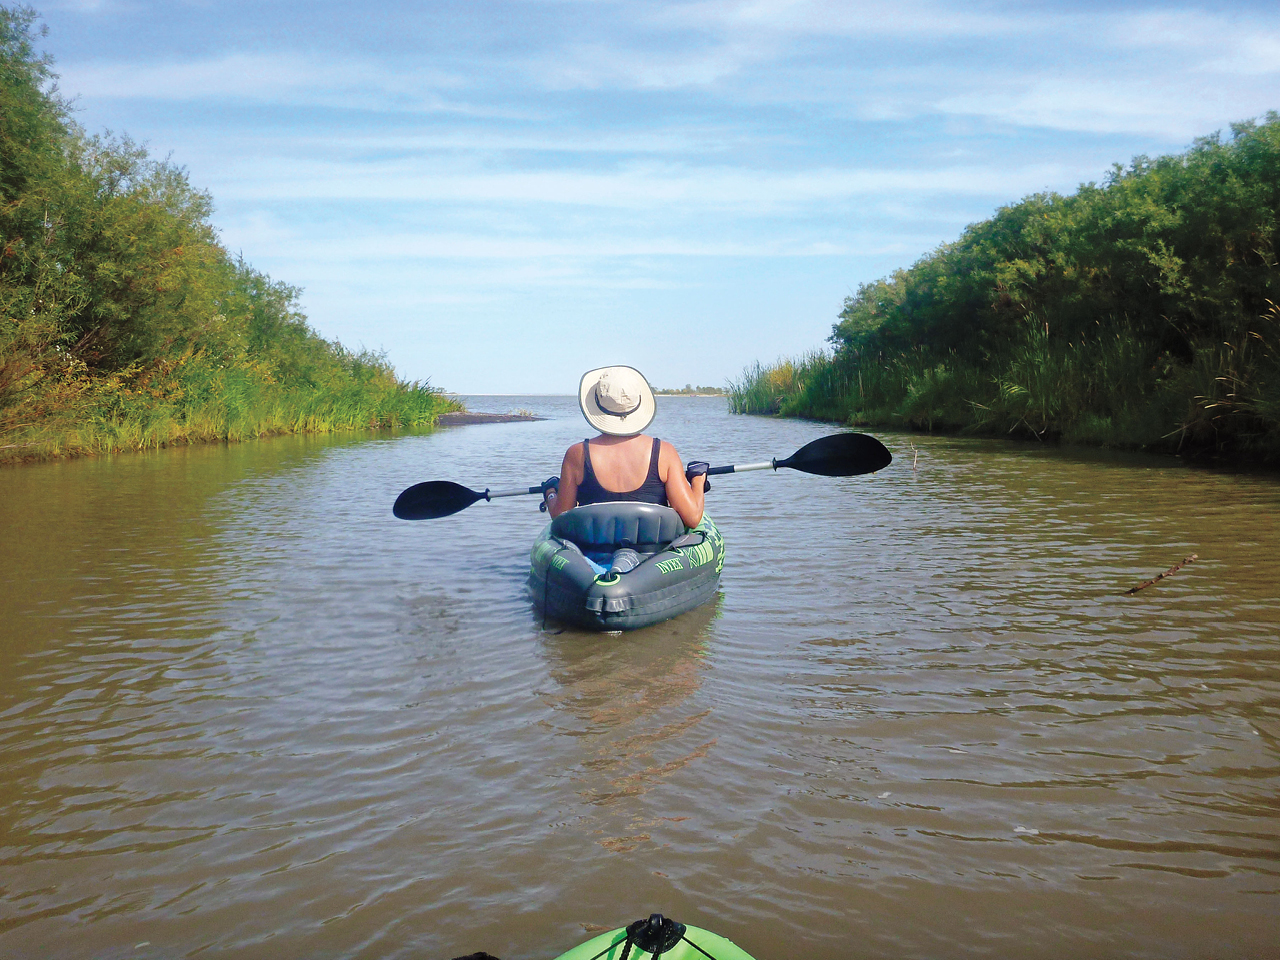 A photo of a woman paddling a river in an inflatable kayak